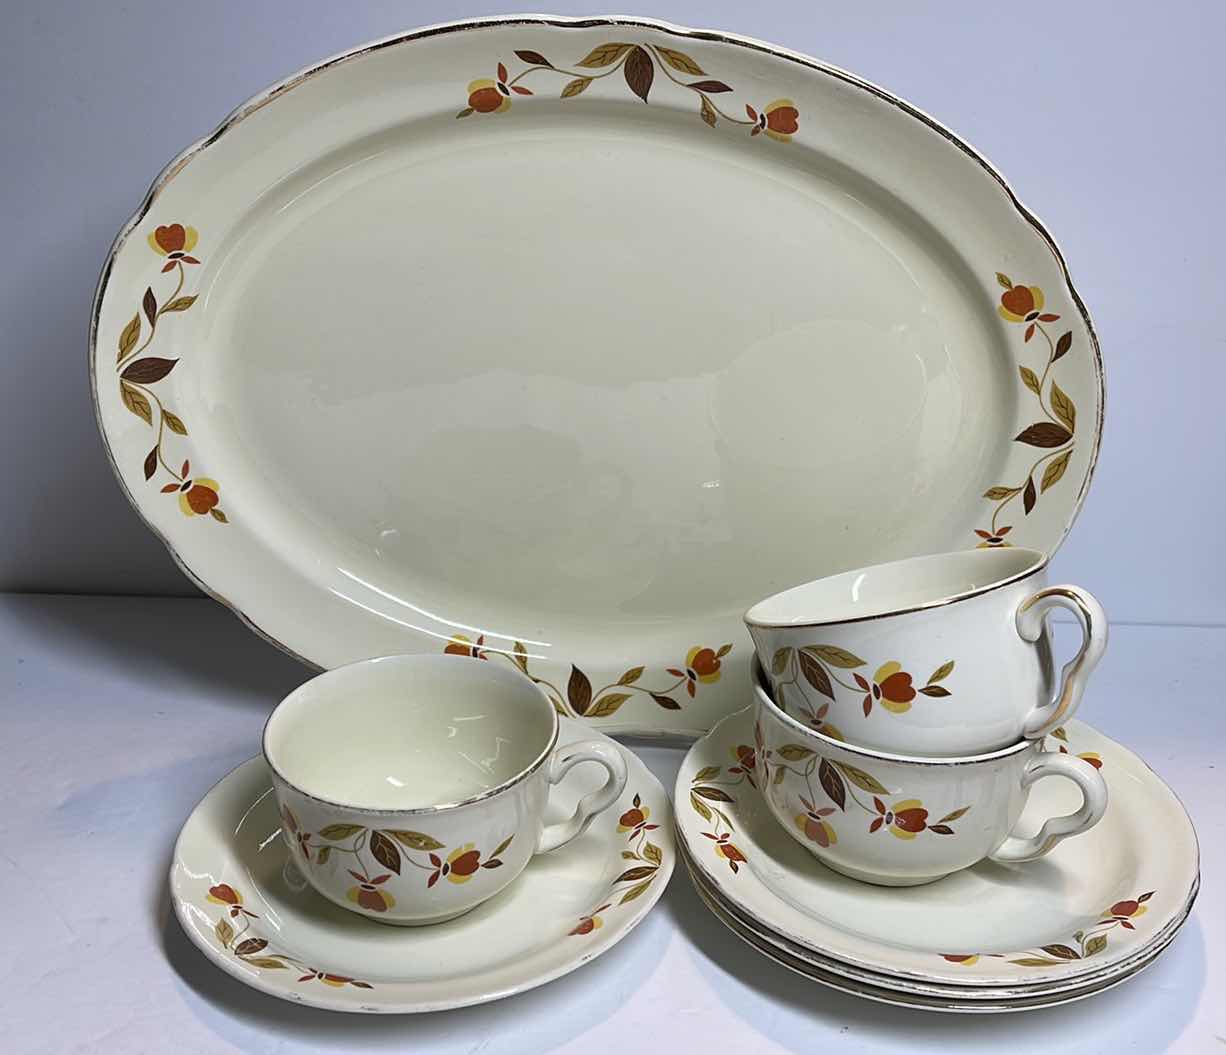 Photo 3 of SUPERIOR HALL QUALITY AUTUMN LEAF PATTERN -1 SERVING TRAY - 3 TEA CUPS - 4 SAUCERS -